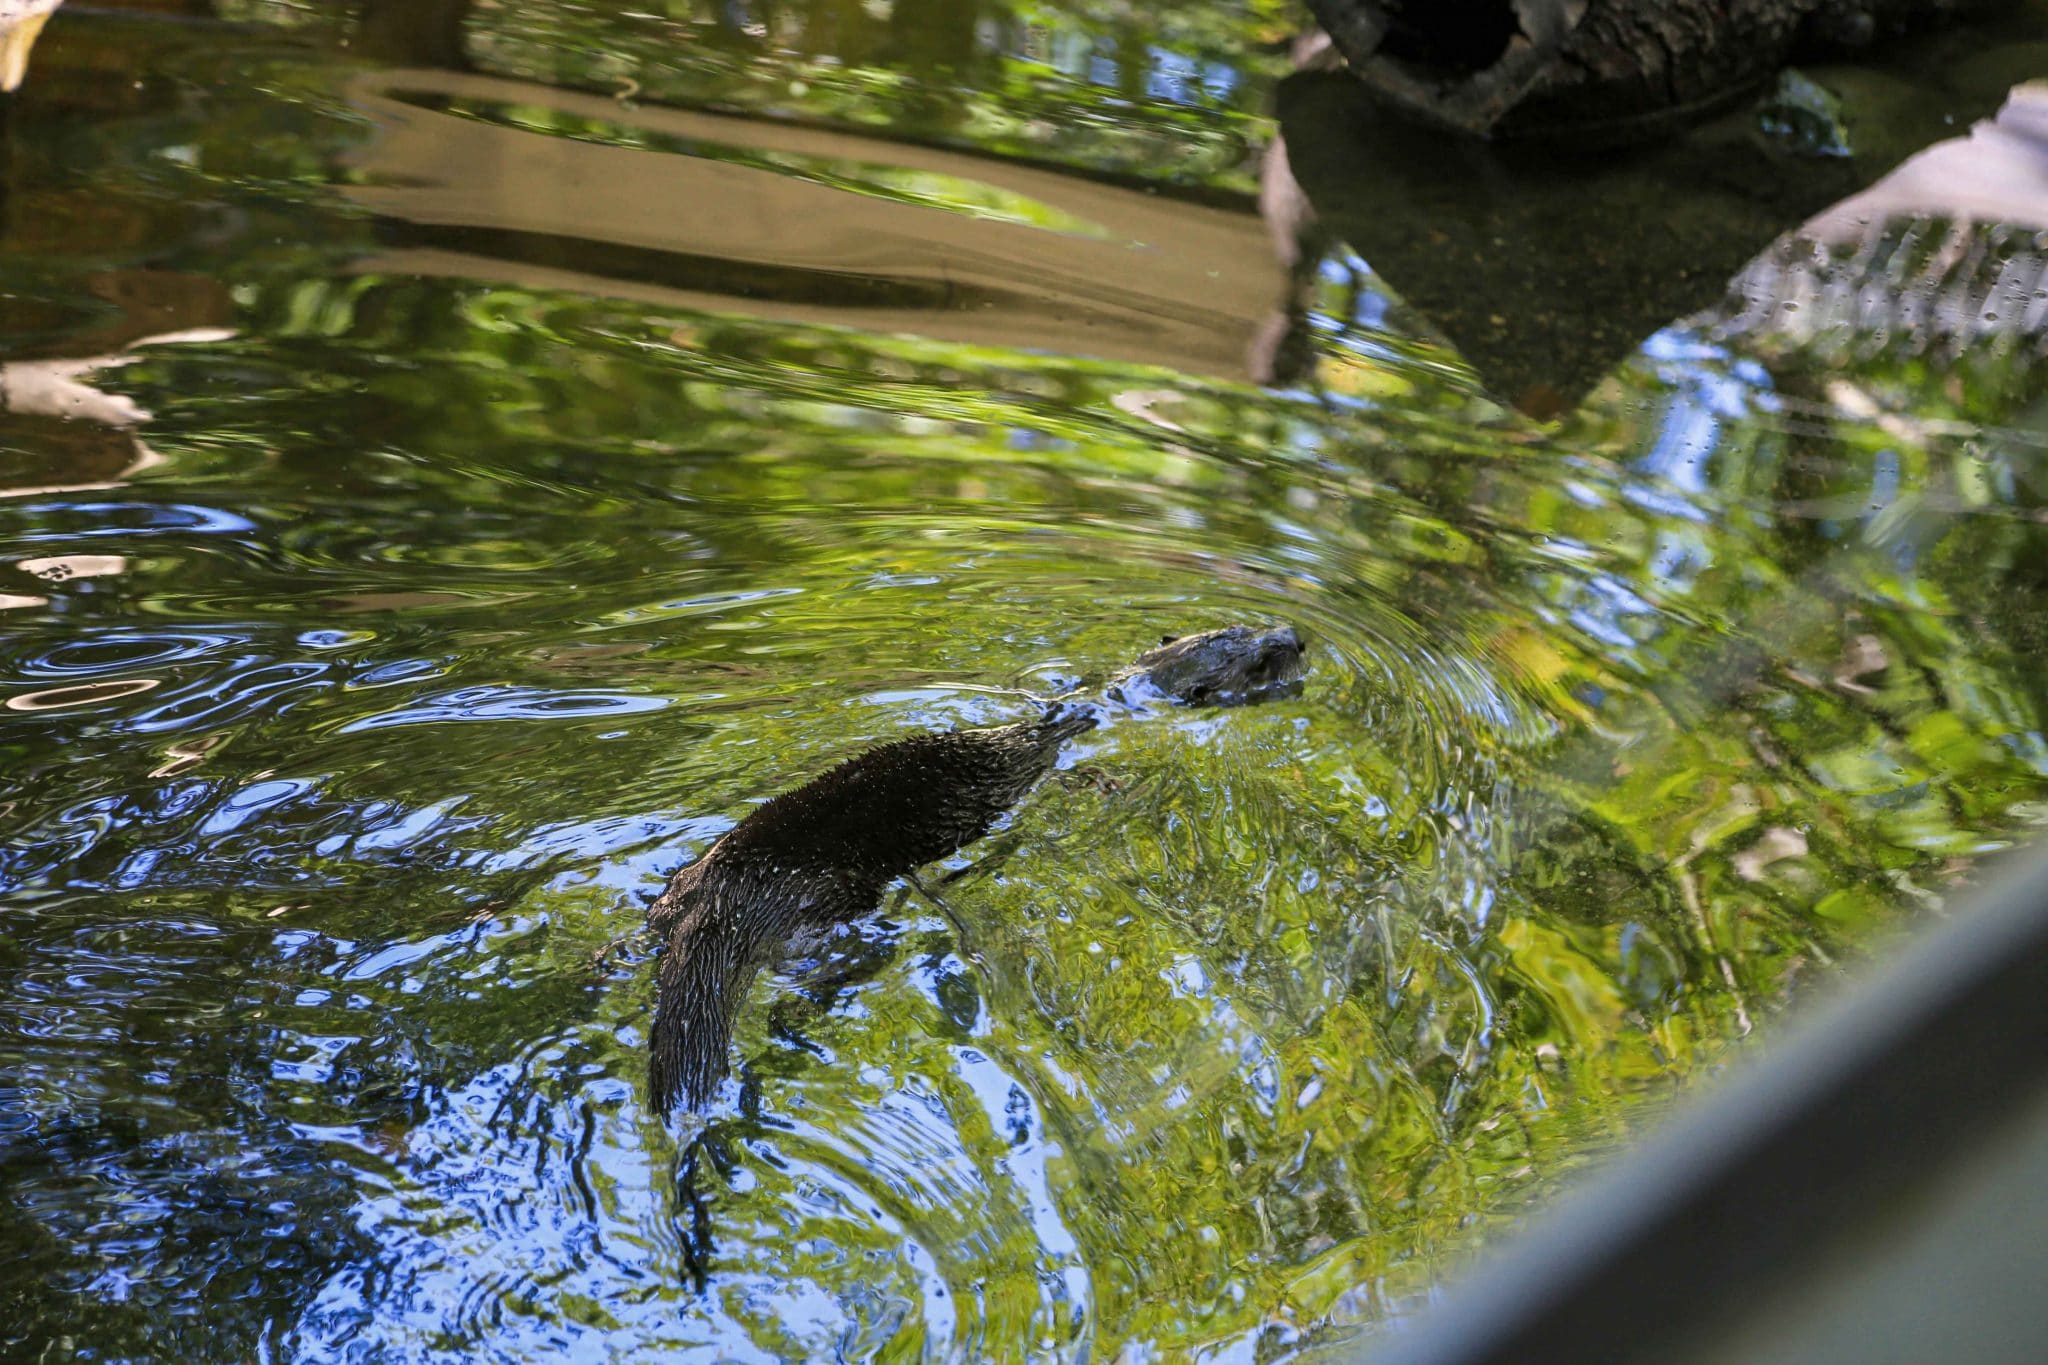 Wildlife Images water enclosure with river otter